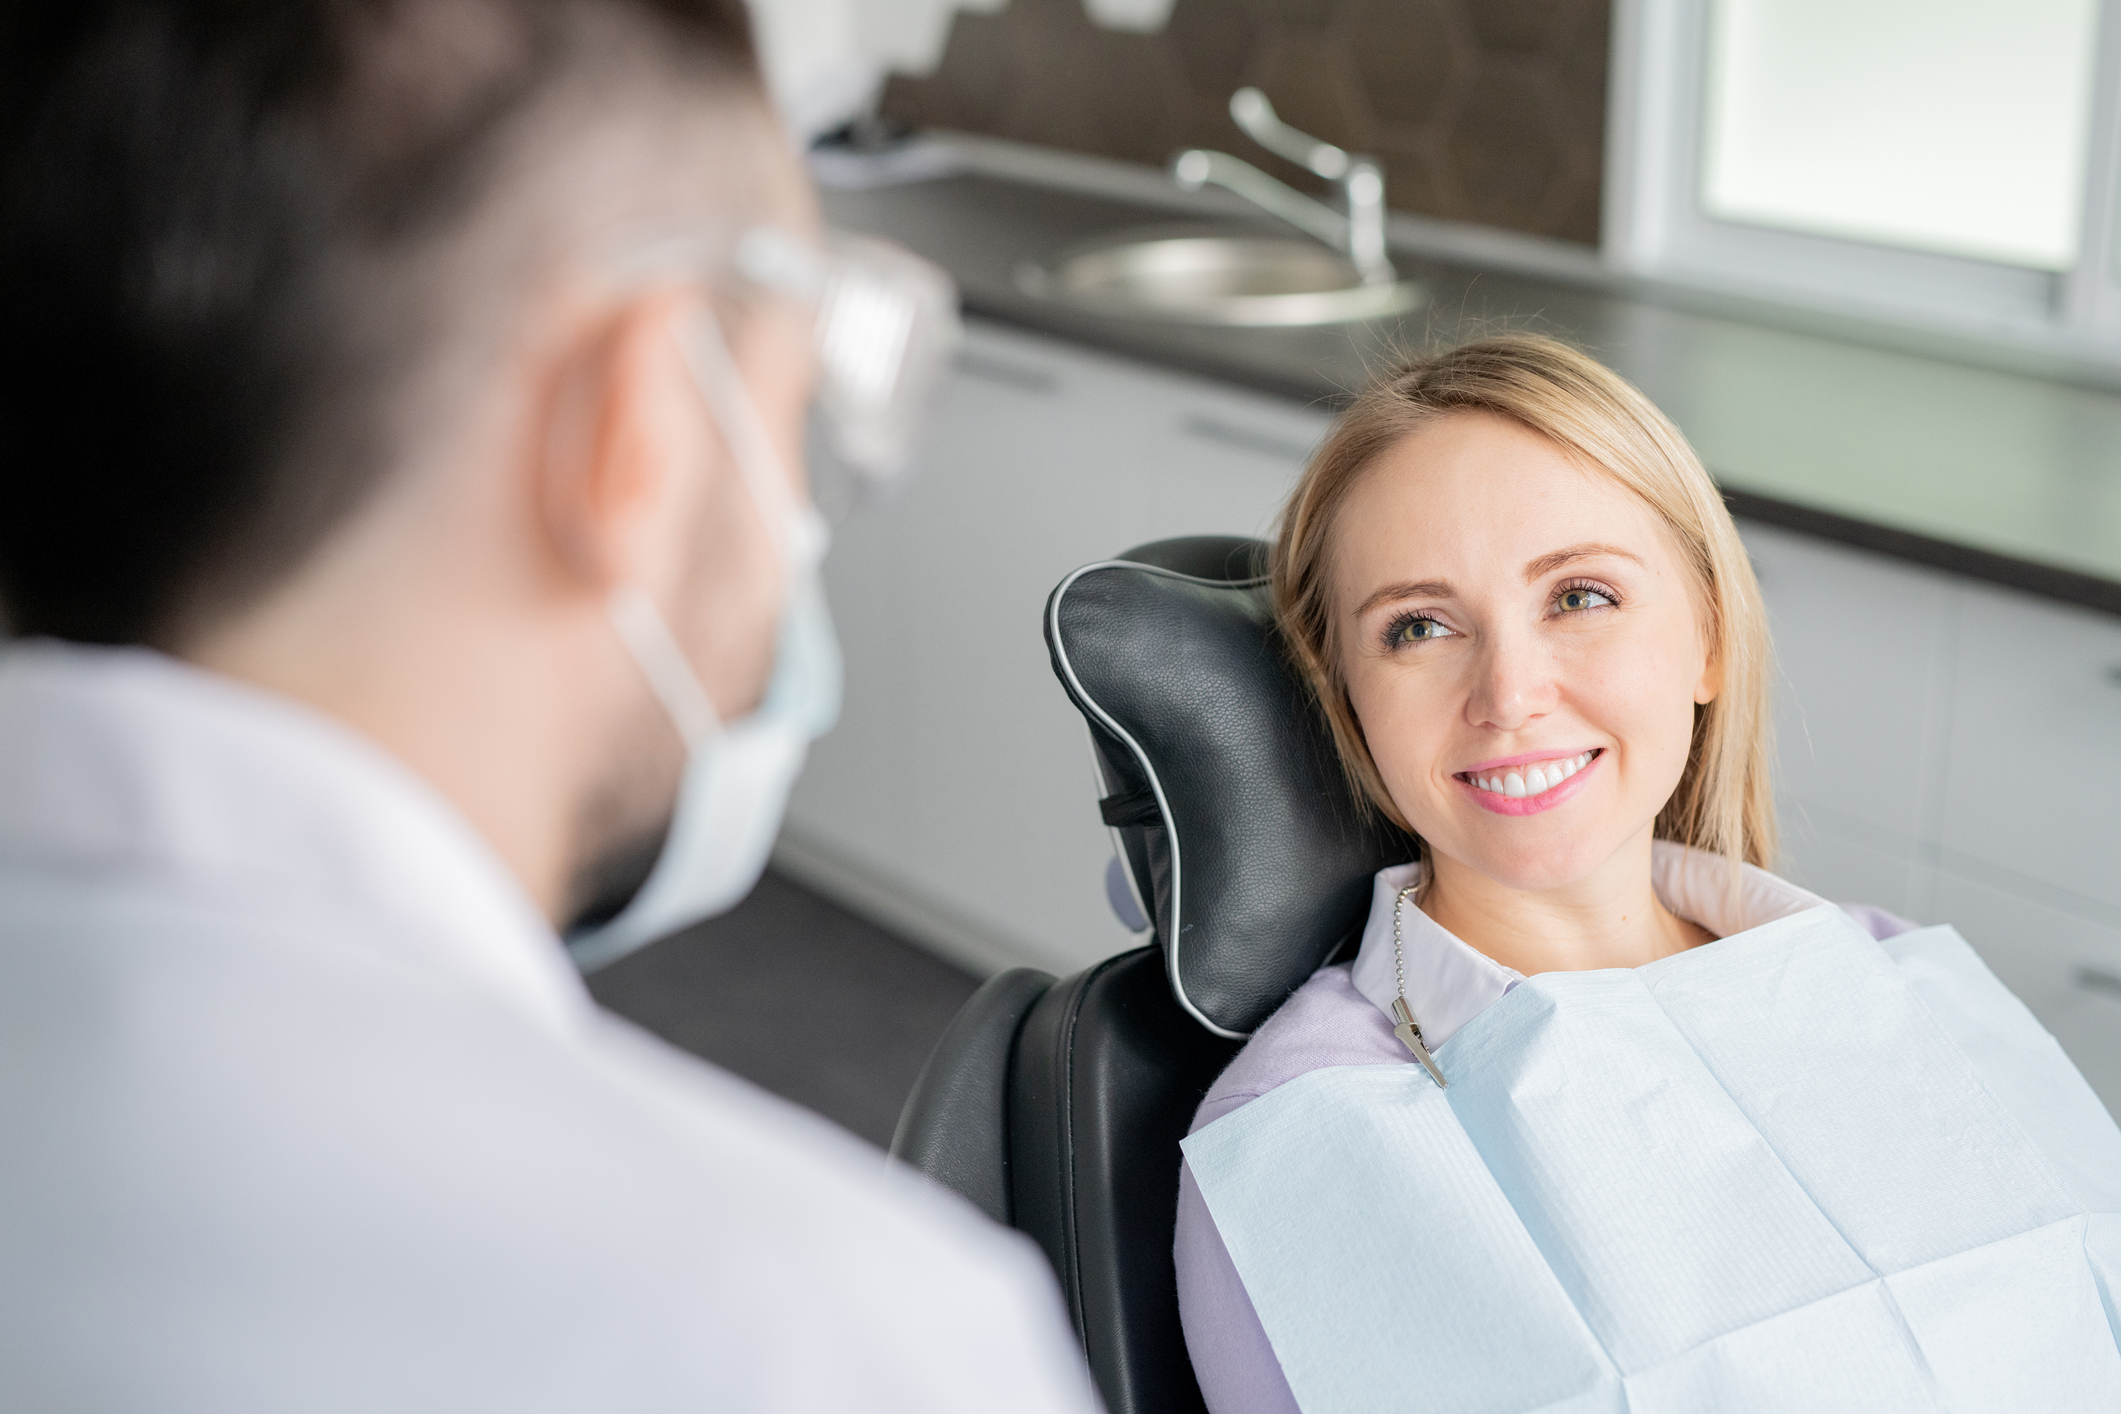 What Can You Expect From a Dental Crowns Procedure?